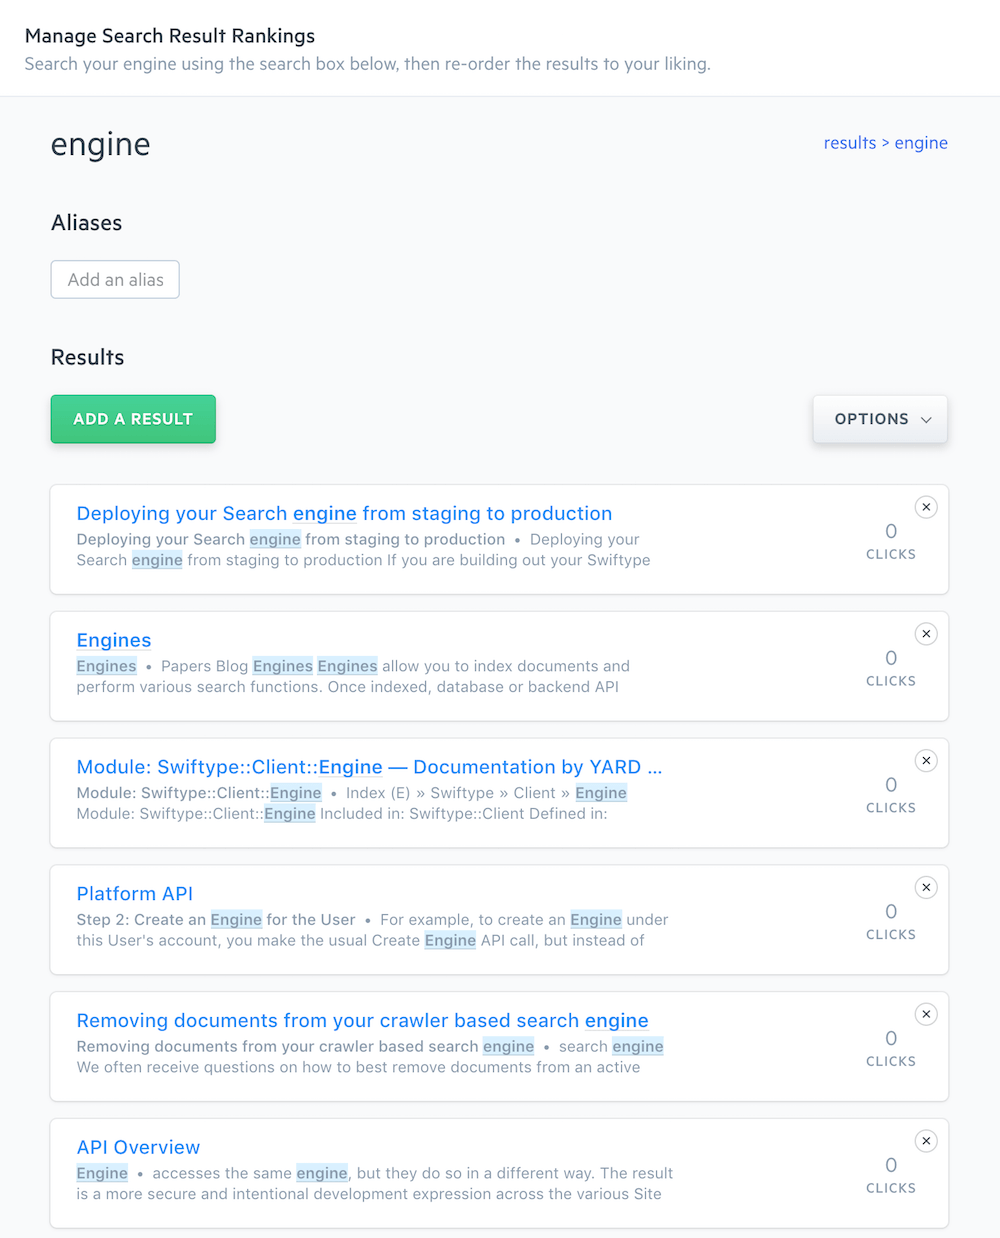 A list of organic search results for the engine query.